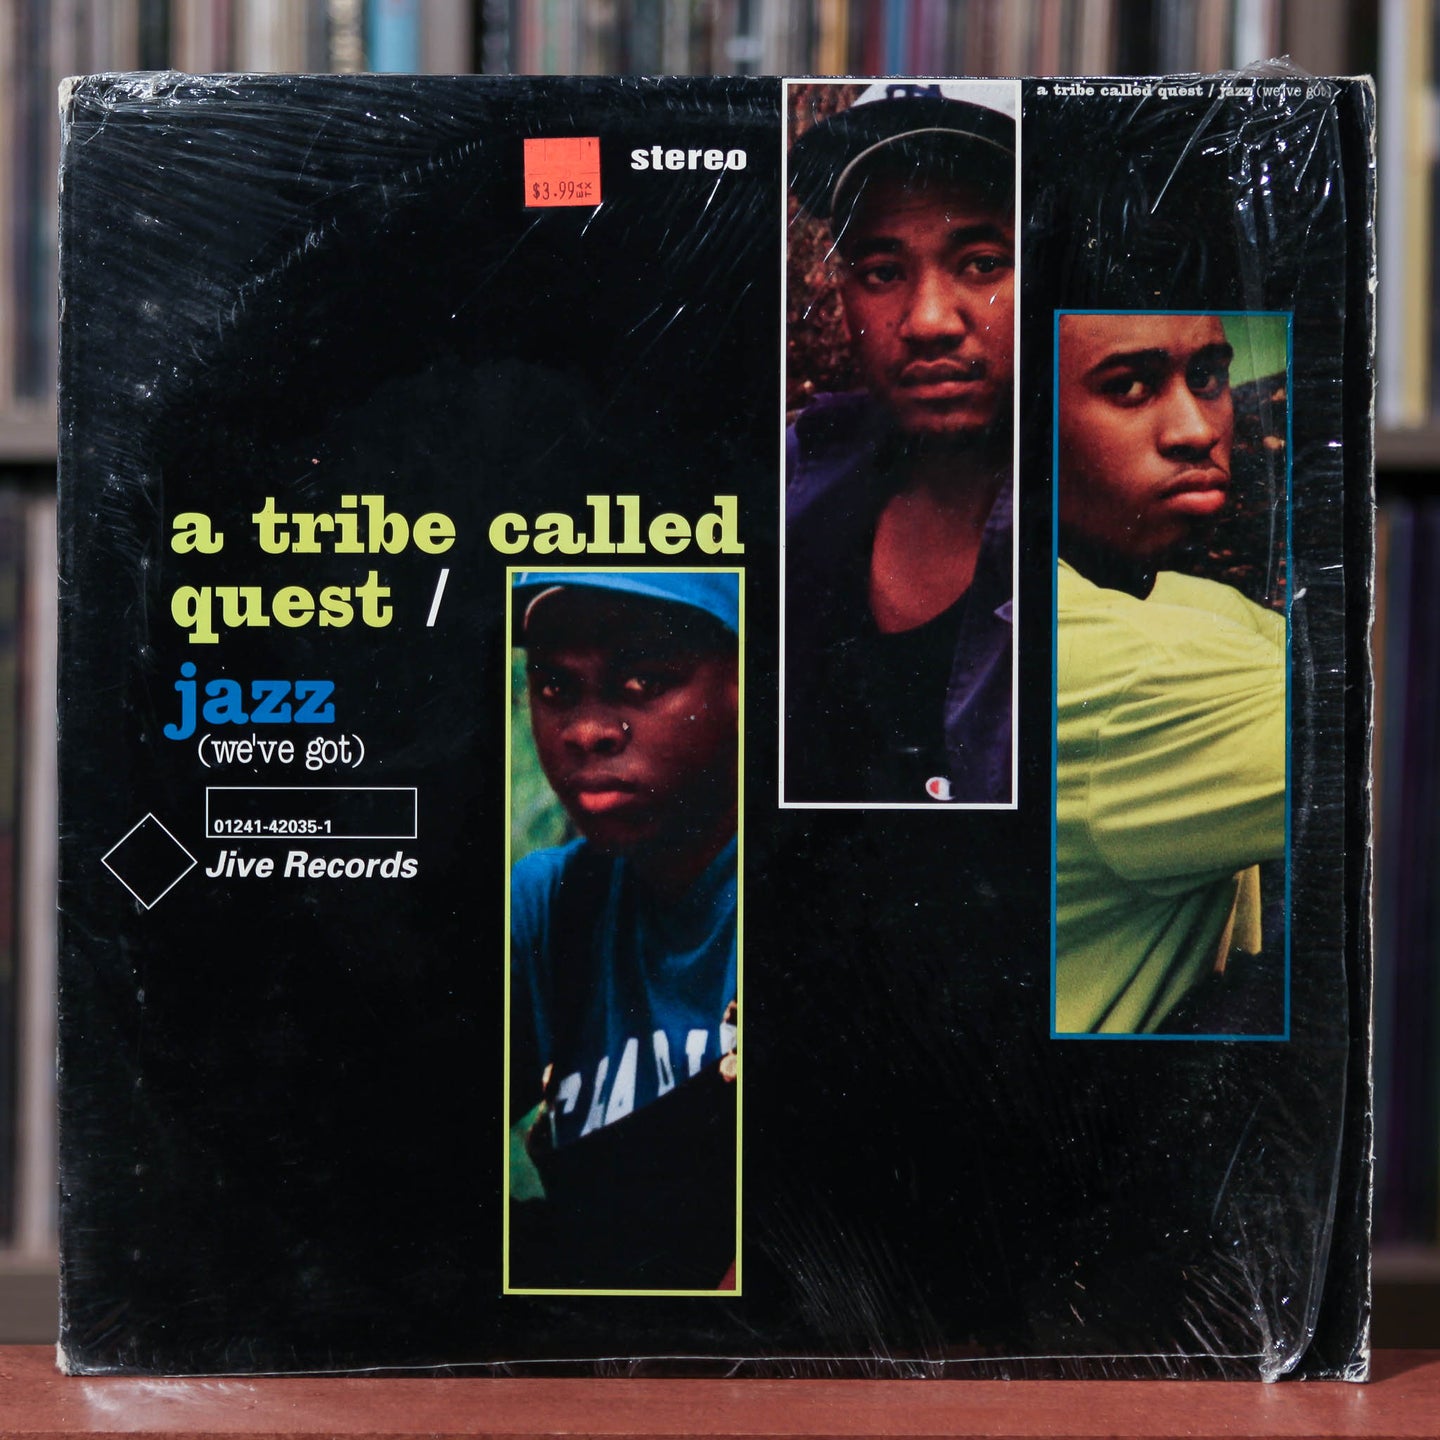 A Tribe Called Quest - Jazz (We've Got) - 12